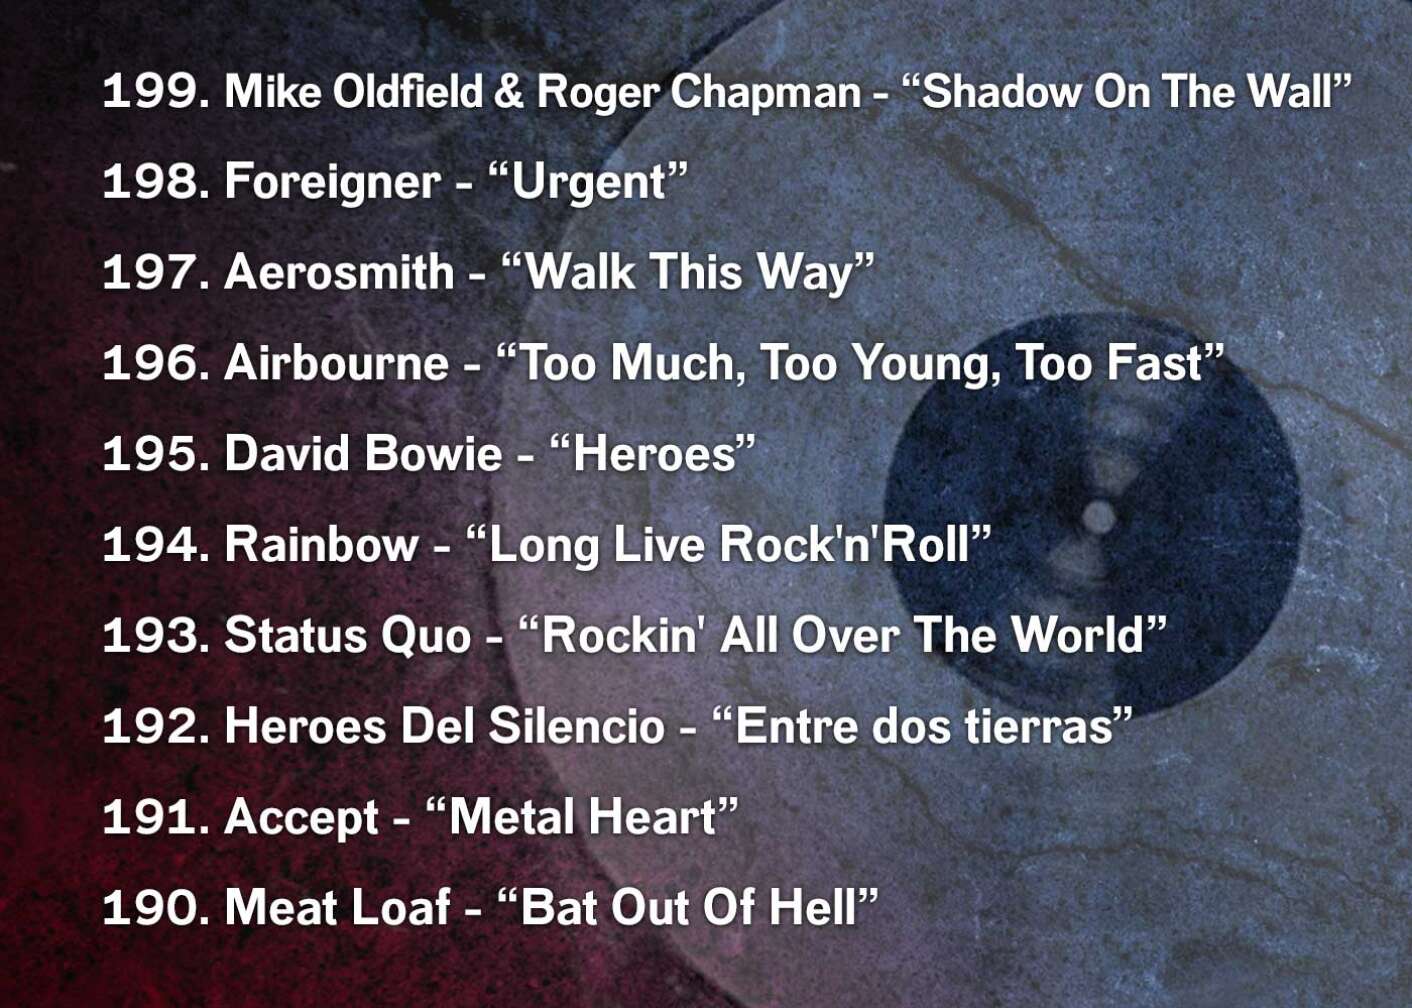 199. Mike Oldfield & Roger Chapman - “Shadow On The Wall” 198. Foreigner - “Urgent” 197. Aerosmith - “Walk This Way” 196. Airbourne - “Too Much, Too Young, Too Fast” 195. David Bowie - “Heroes” 194. Rainbow - “Long Live Rock'n'Roll” 193. Status Quo - “Rockin' All Over The World” 192. Heroes Del Silencio - “Entre dos tierras” 191. Accept - “Metal Heart” 190. Meat Loaf - “Bat Out Of Hell”